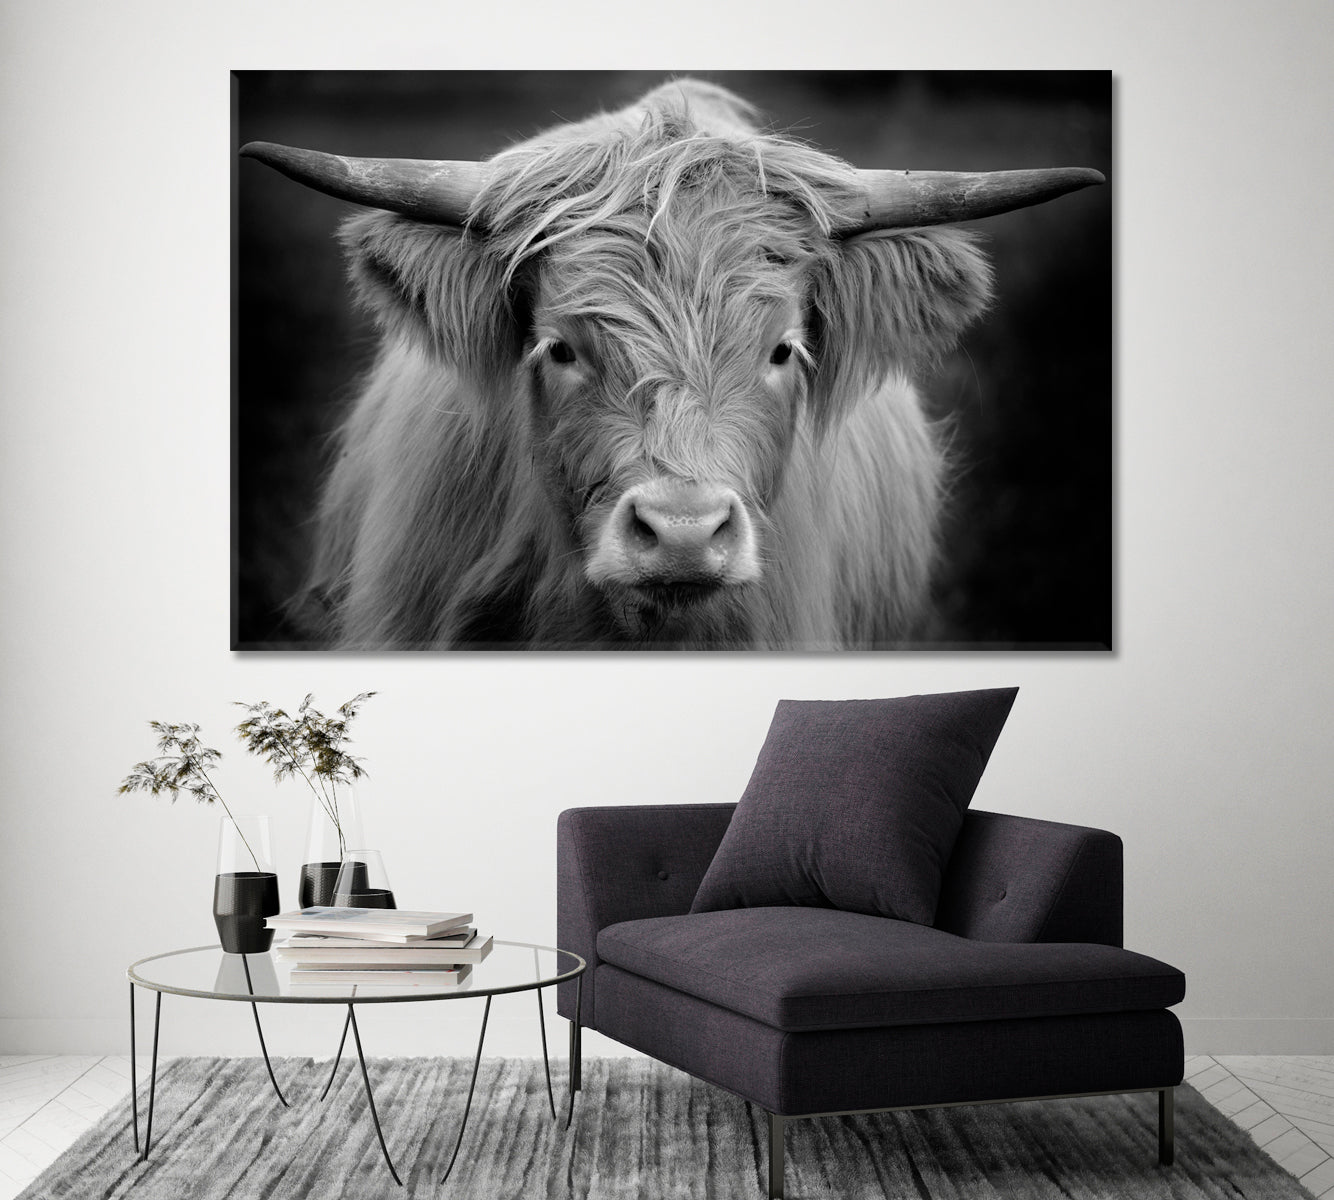 Highland Cow in Black and White Canvas Print ArtLexy 1 Panel 24"x16" inches 